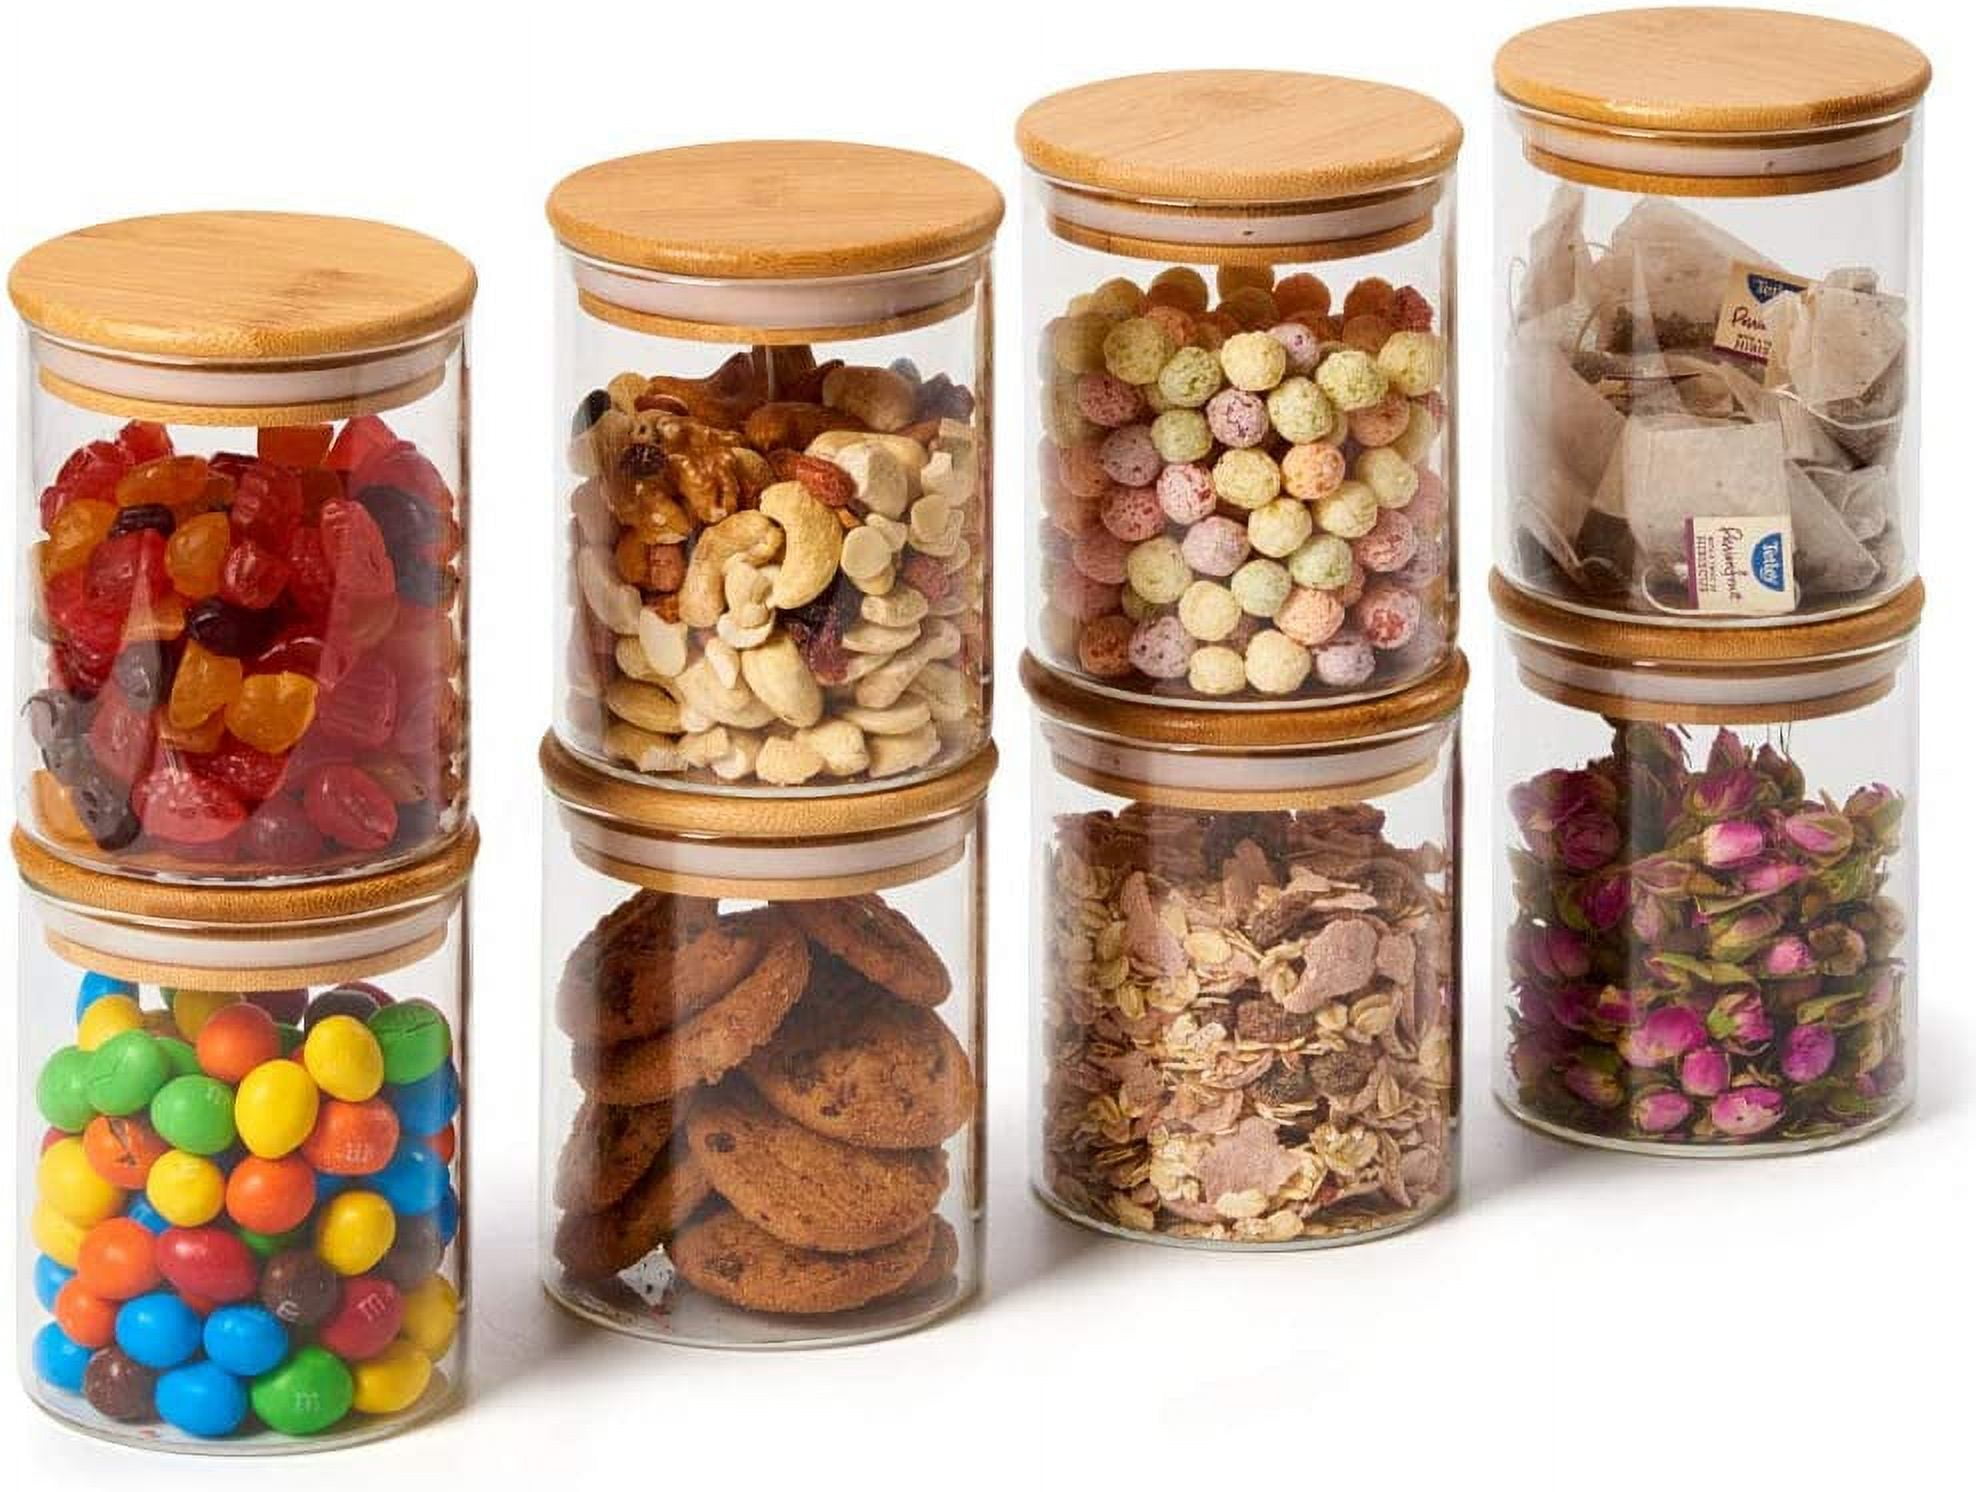  BGraceyy Glass Jars with Bamboo Lids,16 oz 20 pcs Kitchen Glass  Containers with Bamboo Lids, Airtight Glass Pantry Storage Containers with  Lids for Rice, Candy, Sugar, Flour, Nuts, Cookie, Spice: Home